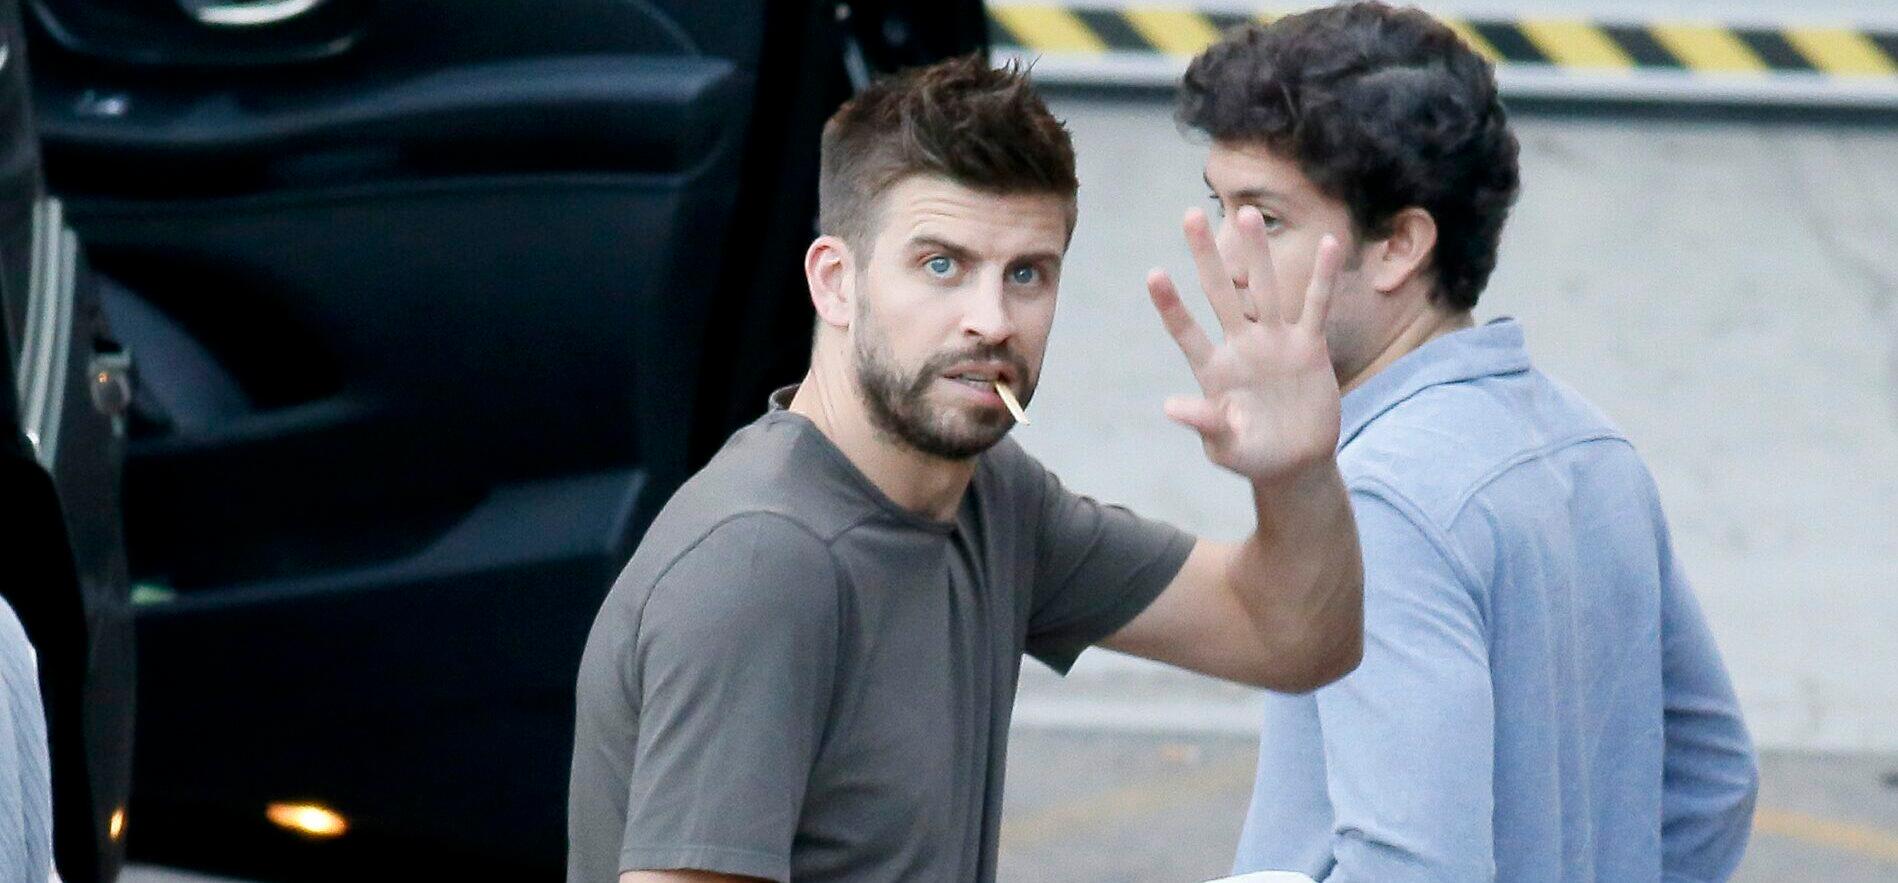 Gerard Piqué Caught Red Handed Checking Out Shakira’s Social Media!